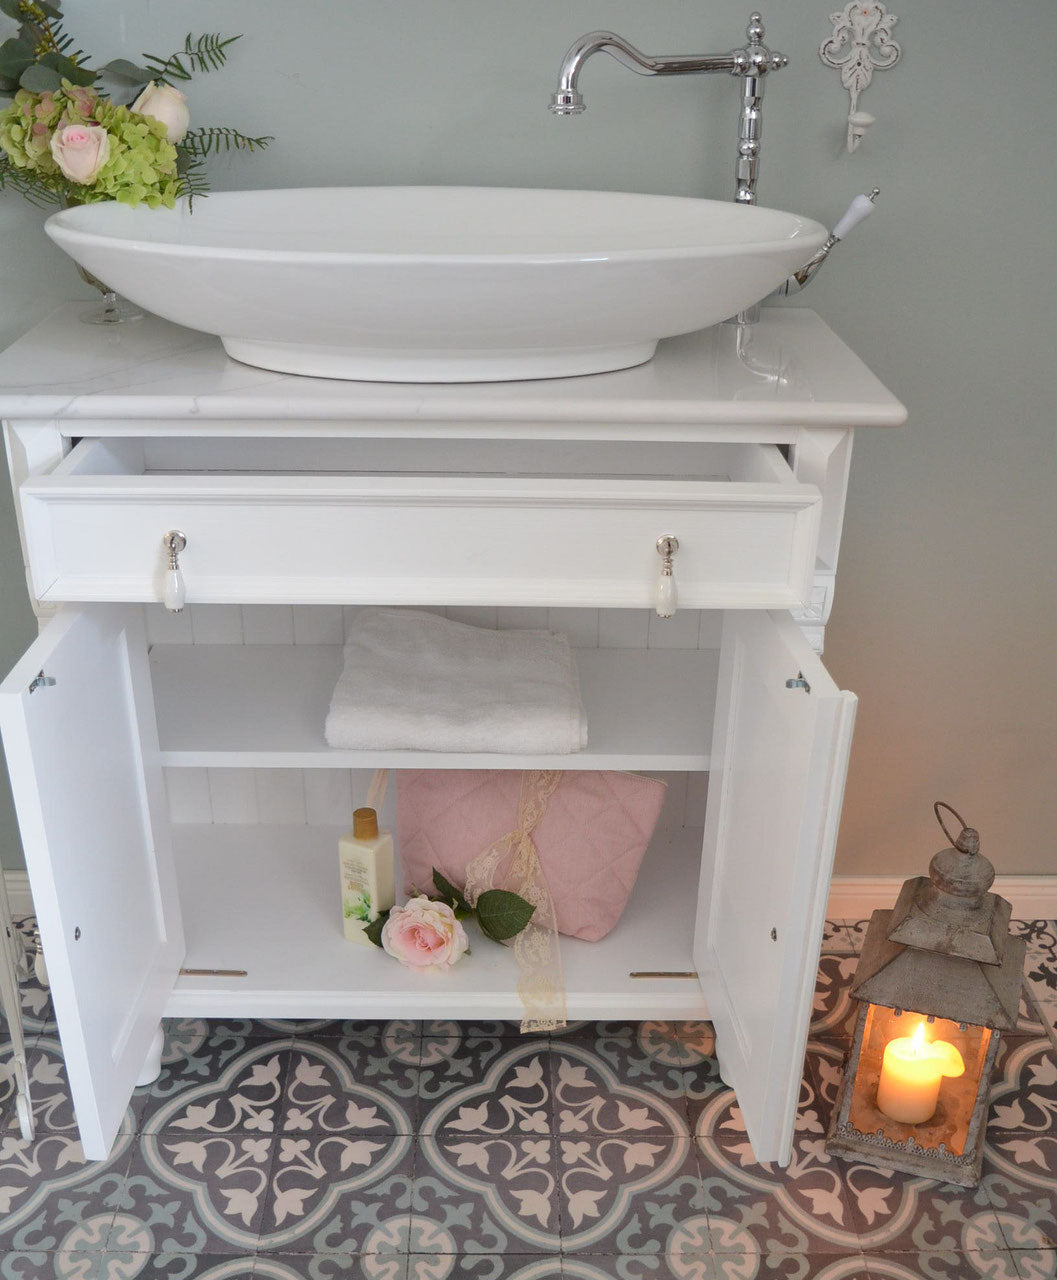 "Bressuire" - white washbasin with light marble top in country house style